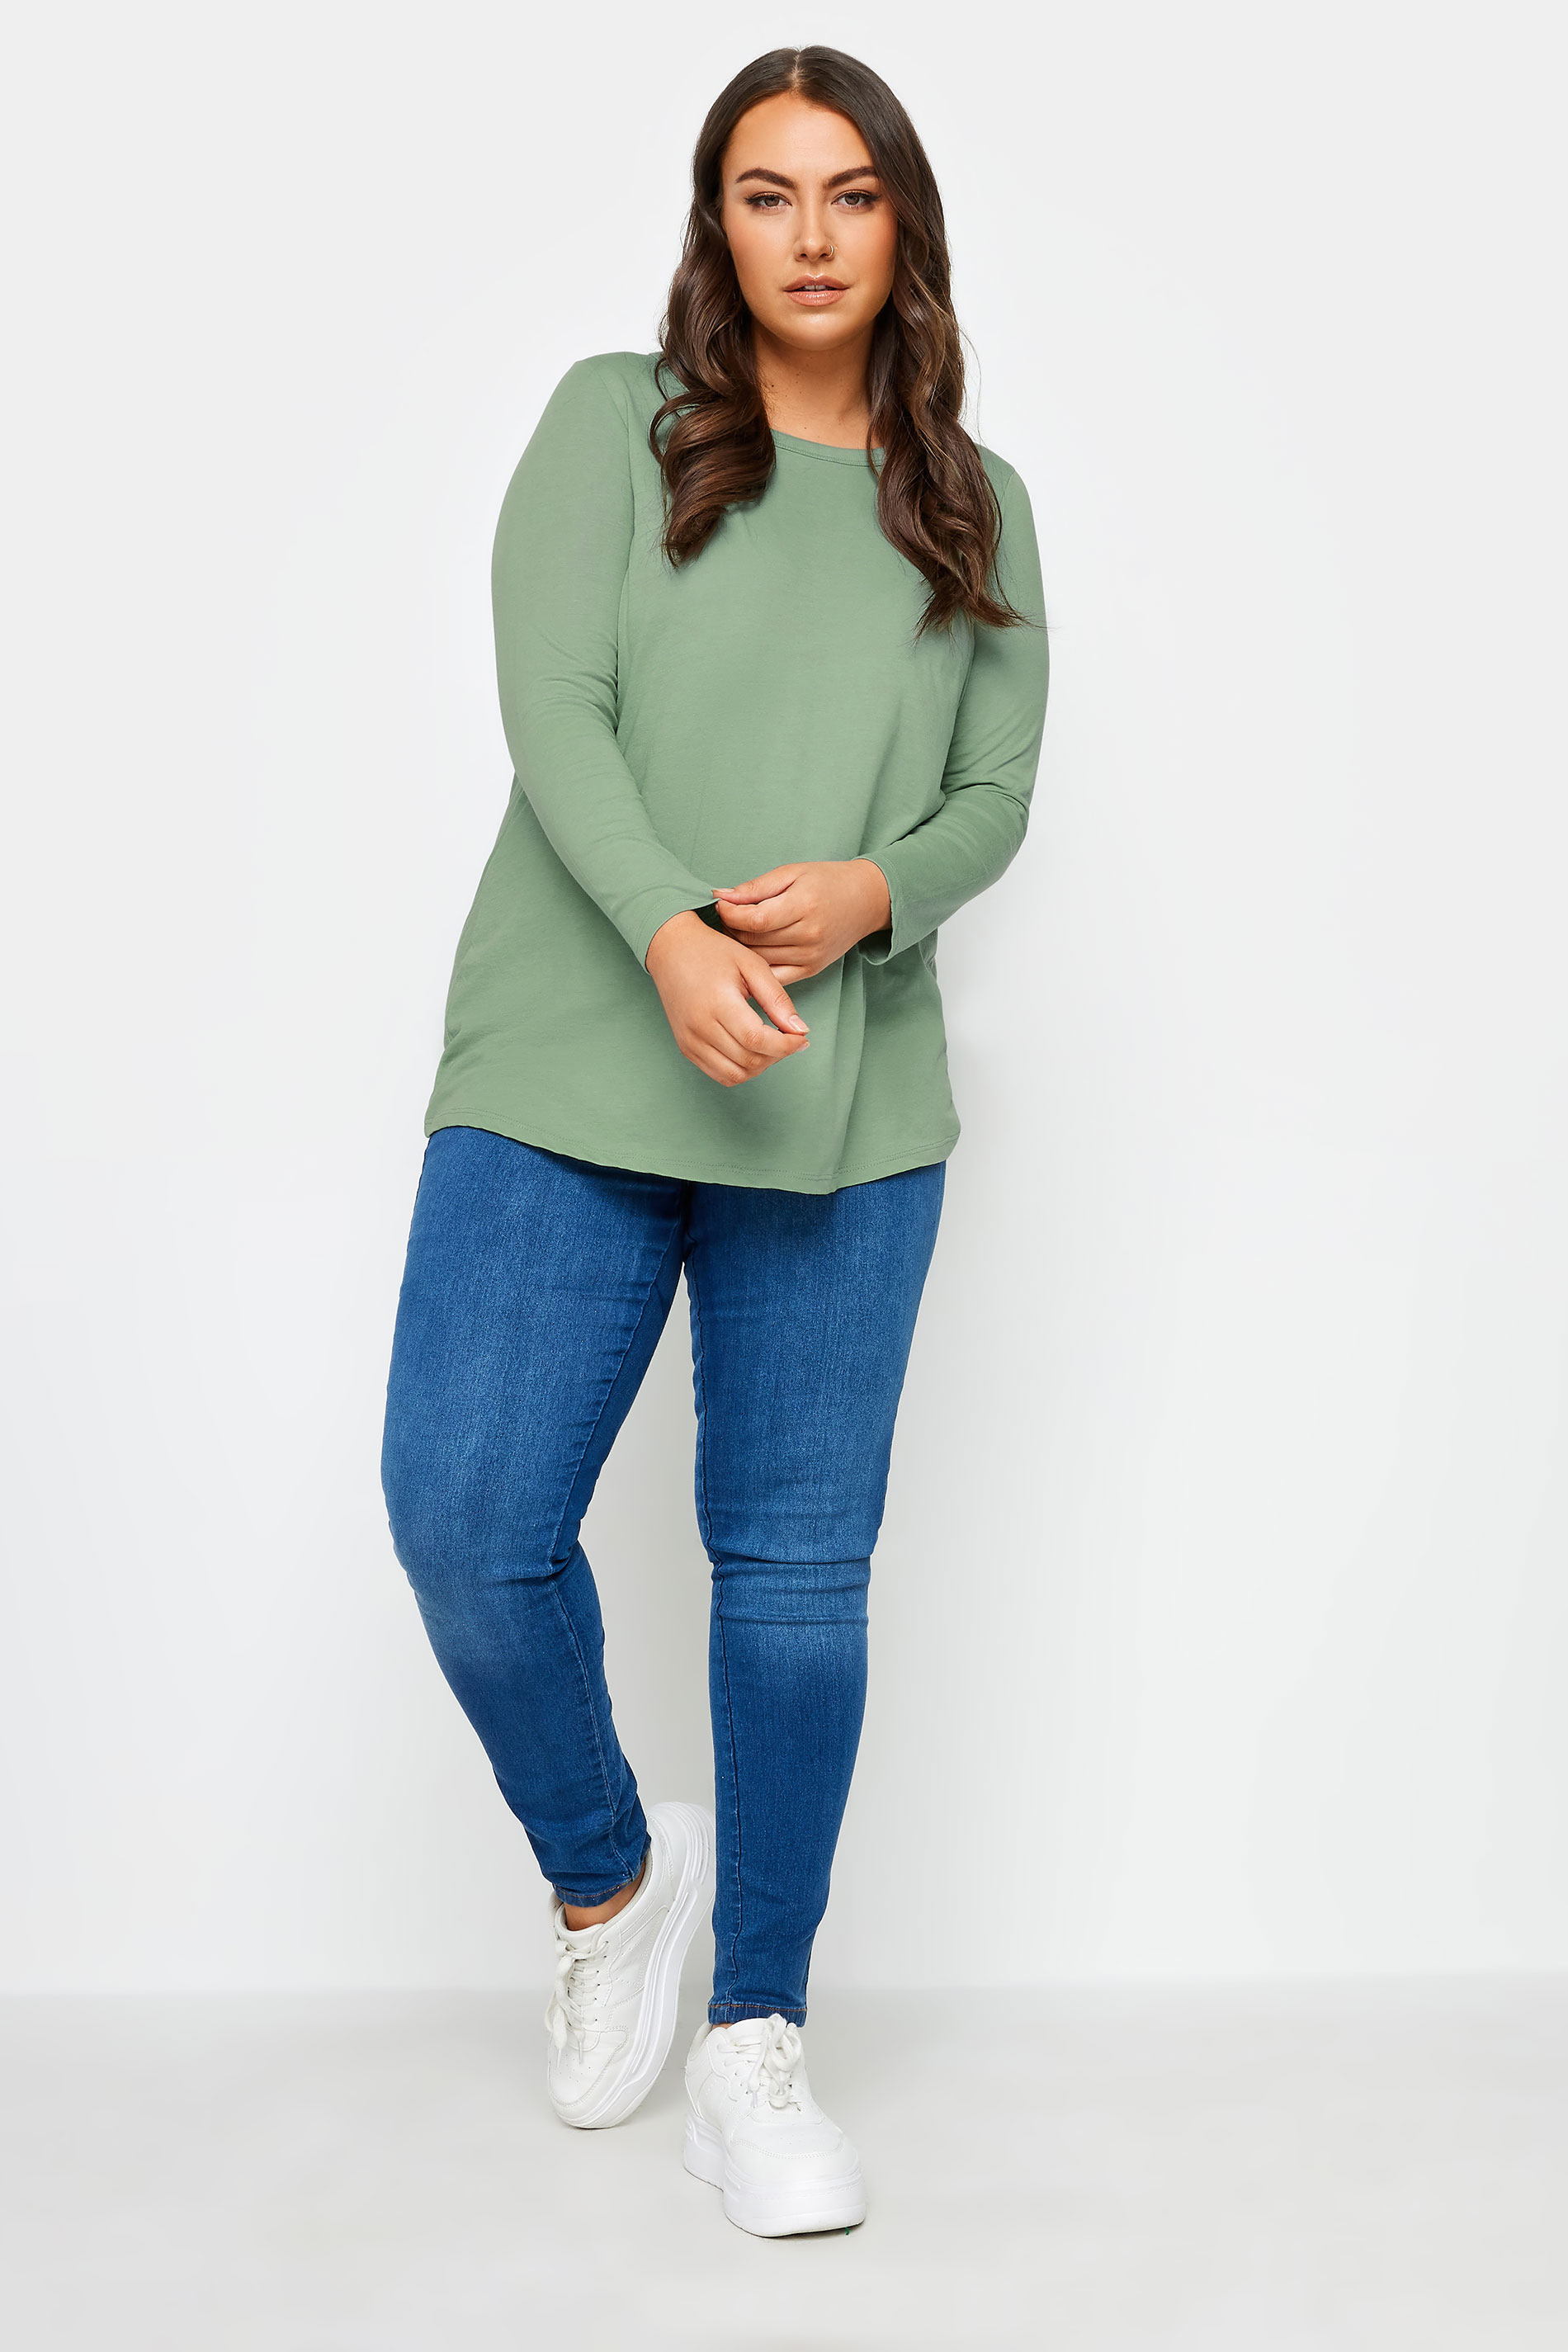 YOURS 3 PACK Plus Size Navy Blue & White Long Sleeve Tops | Yours Clothing 3